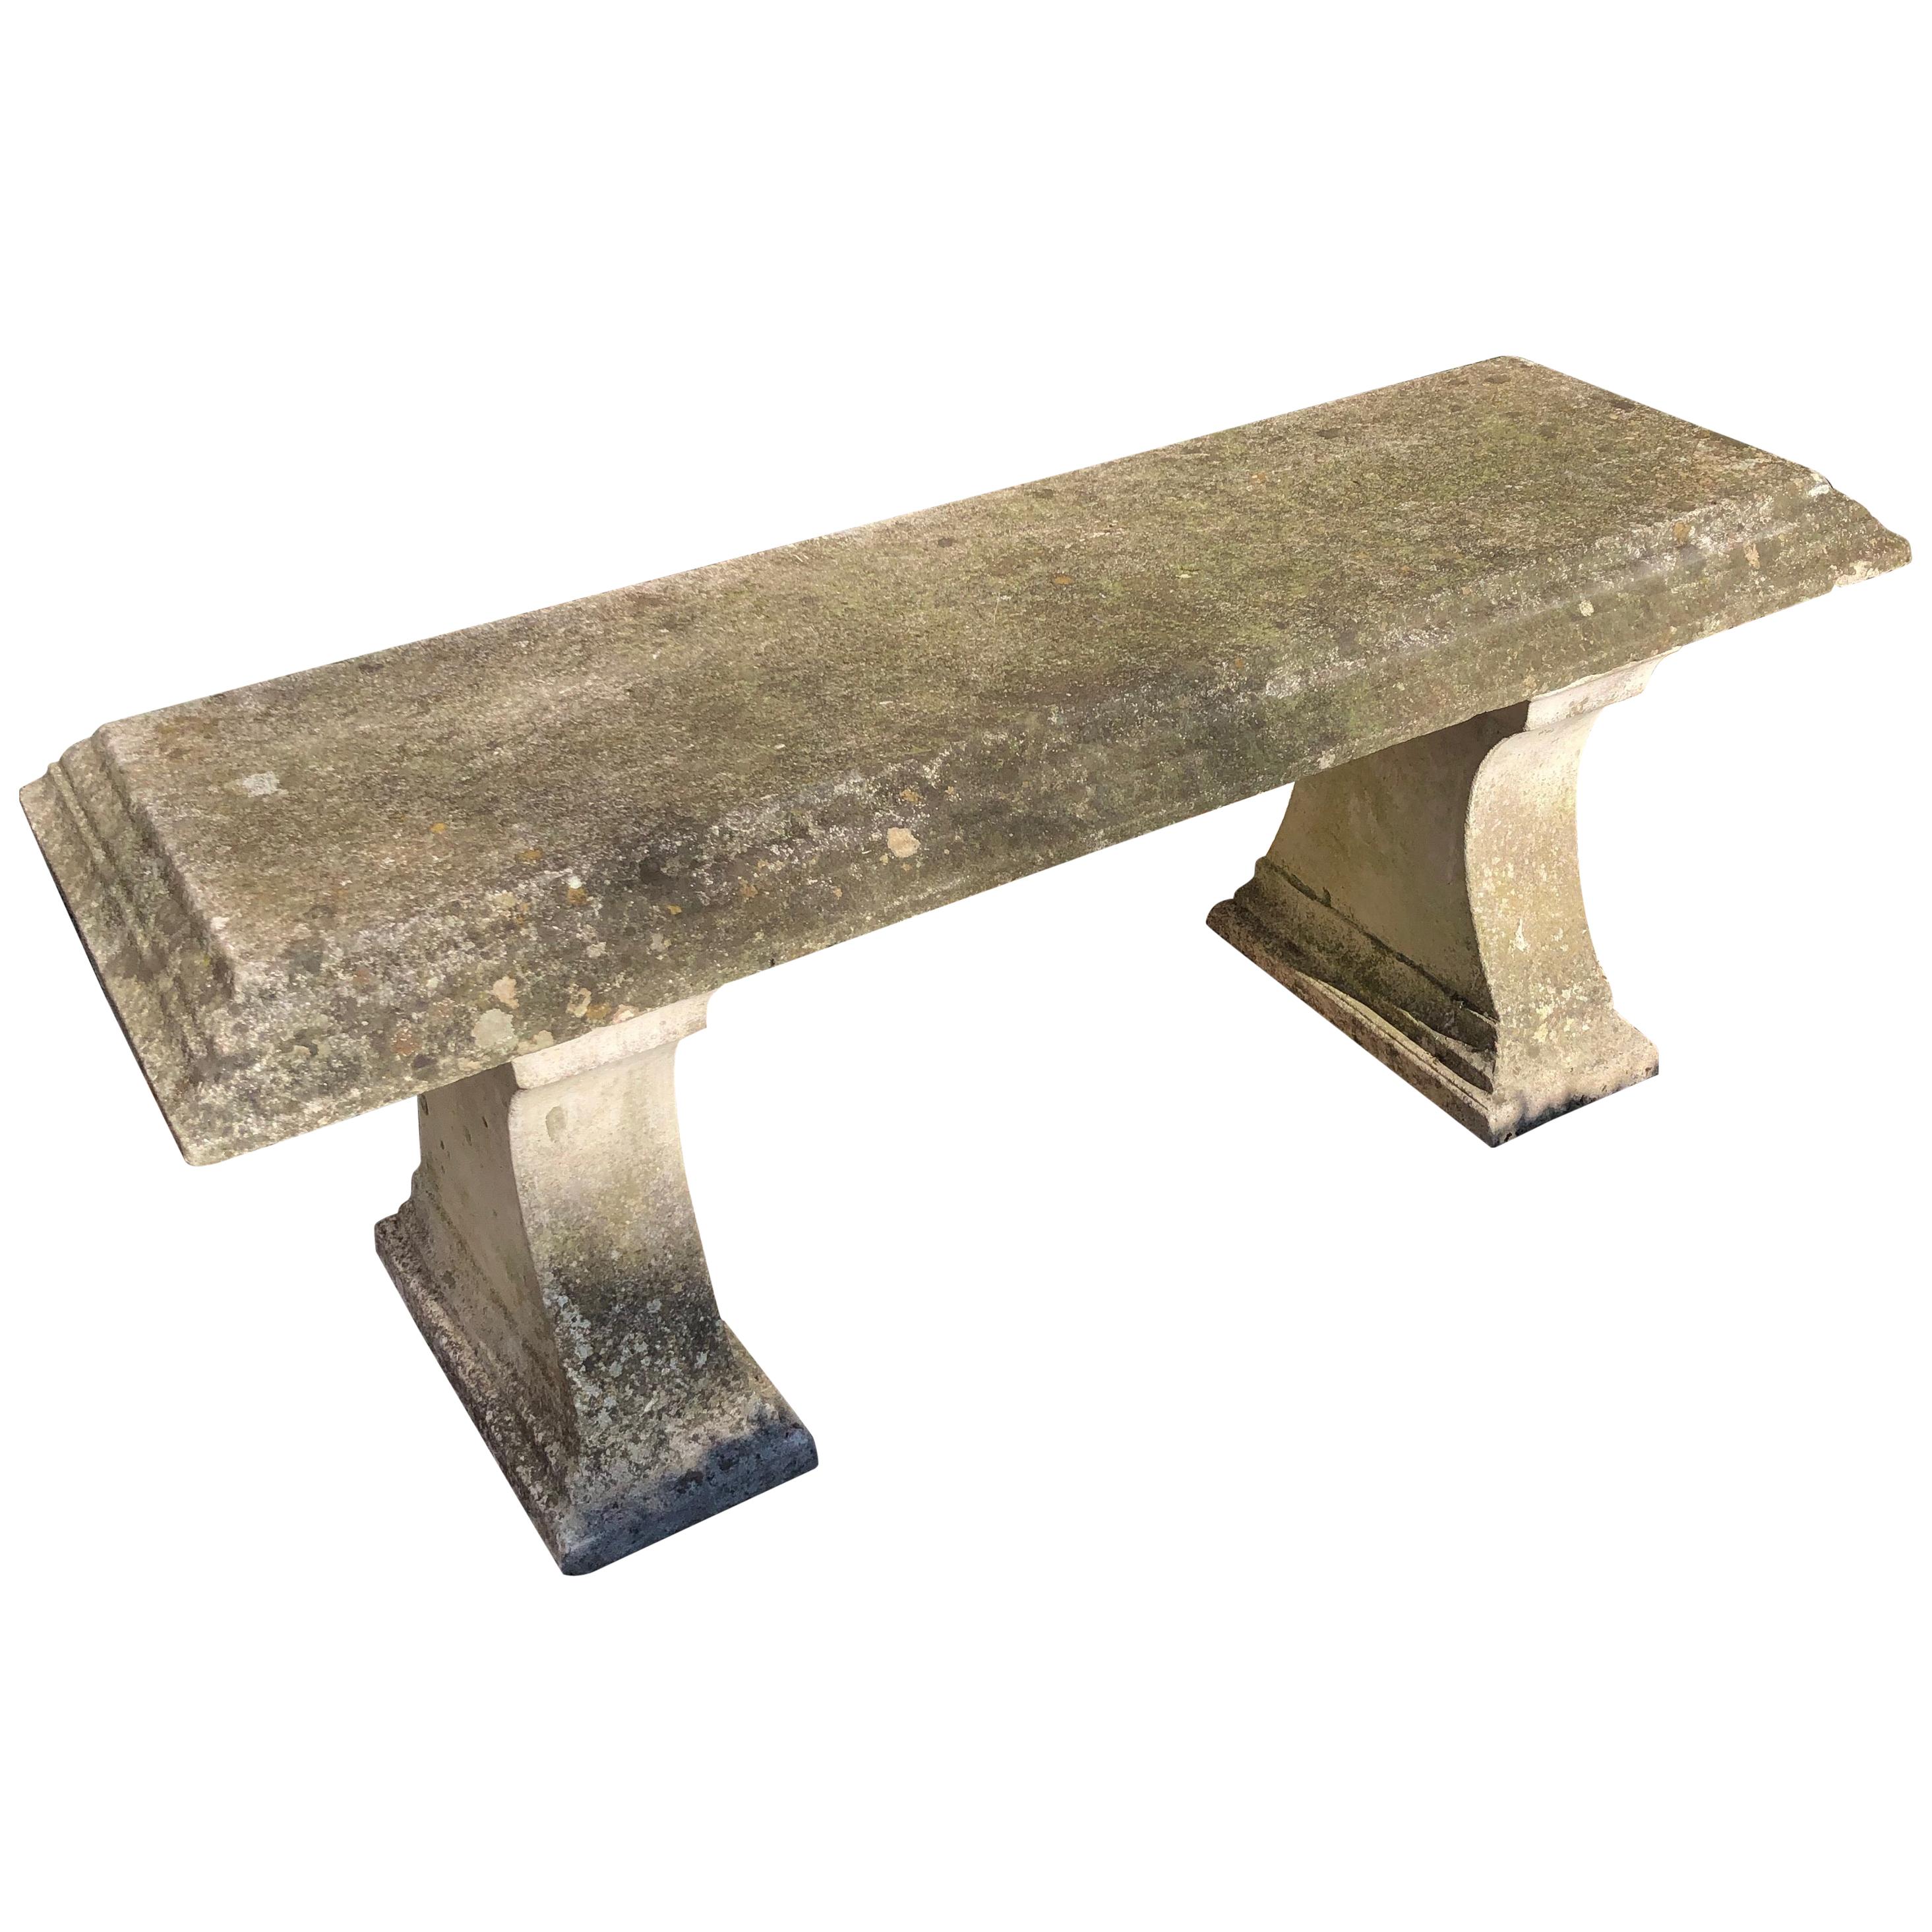 Weathered English Cast Stone Garden Bench with Tiered Decorative Edging